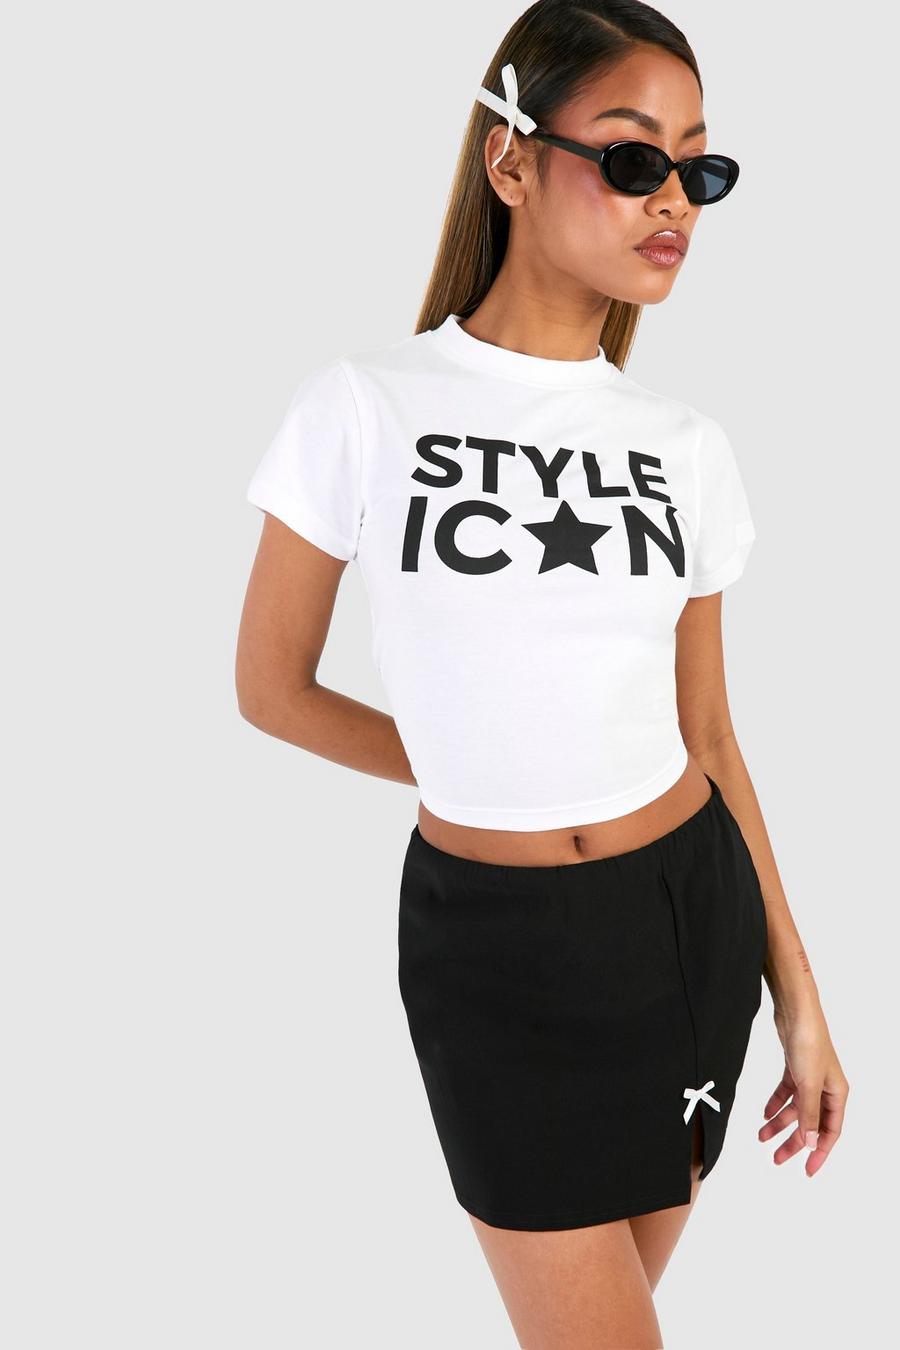 Style Icon Baby T-Shirt, White image number 1